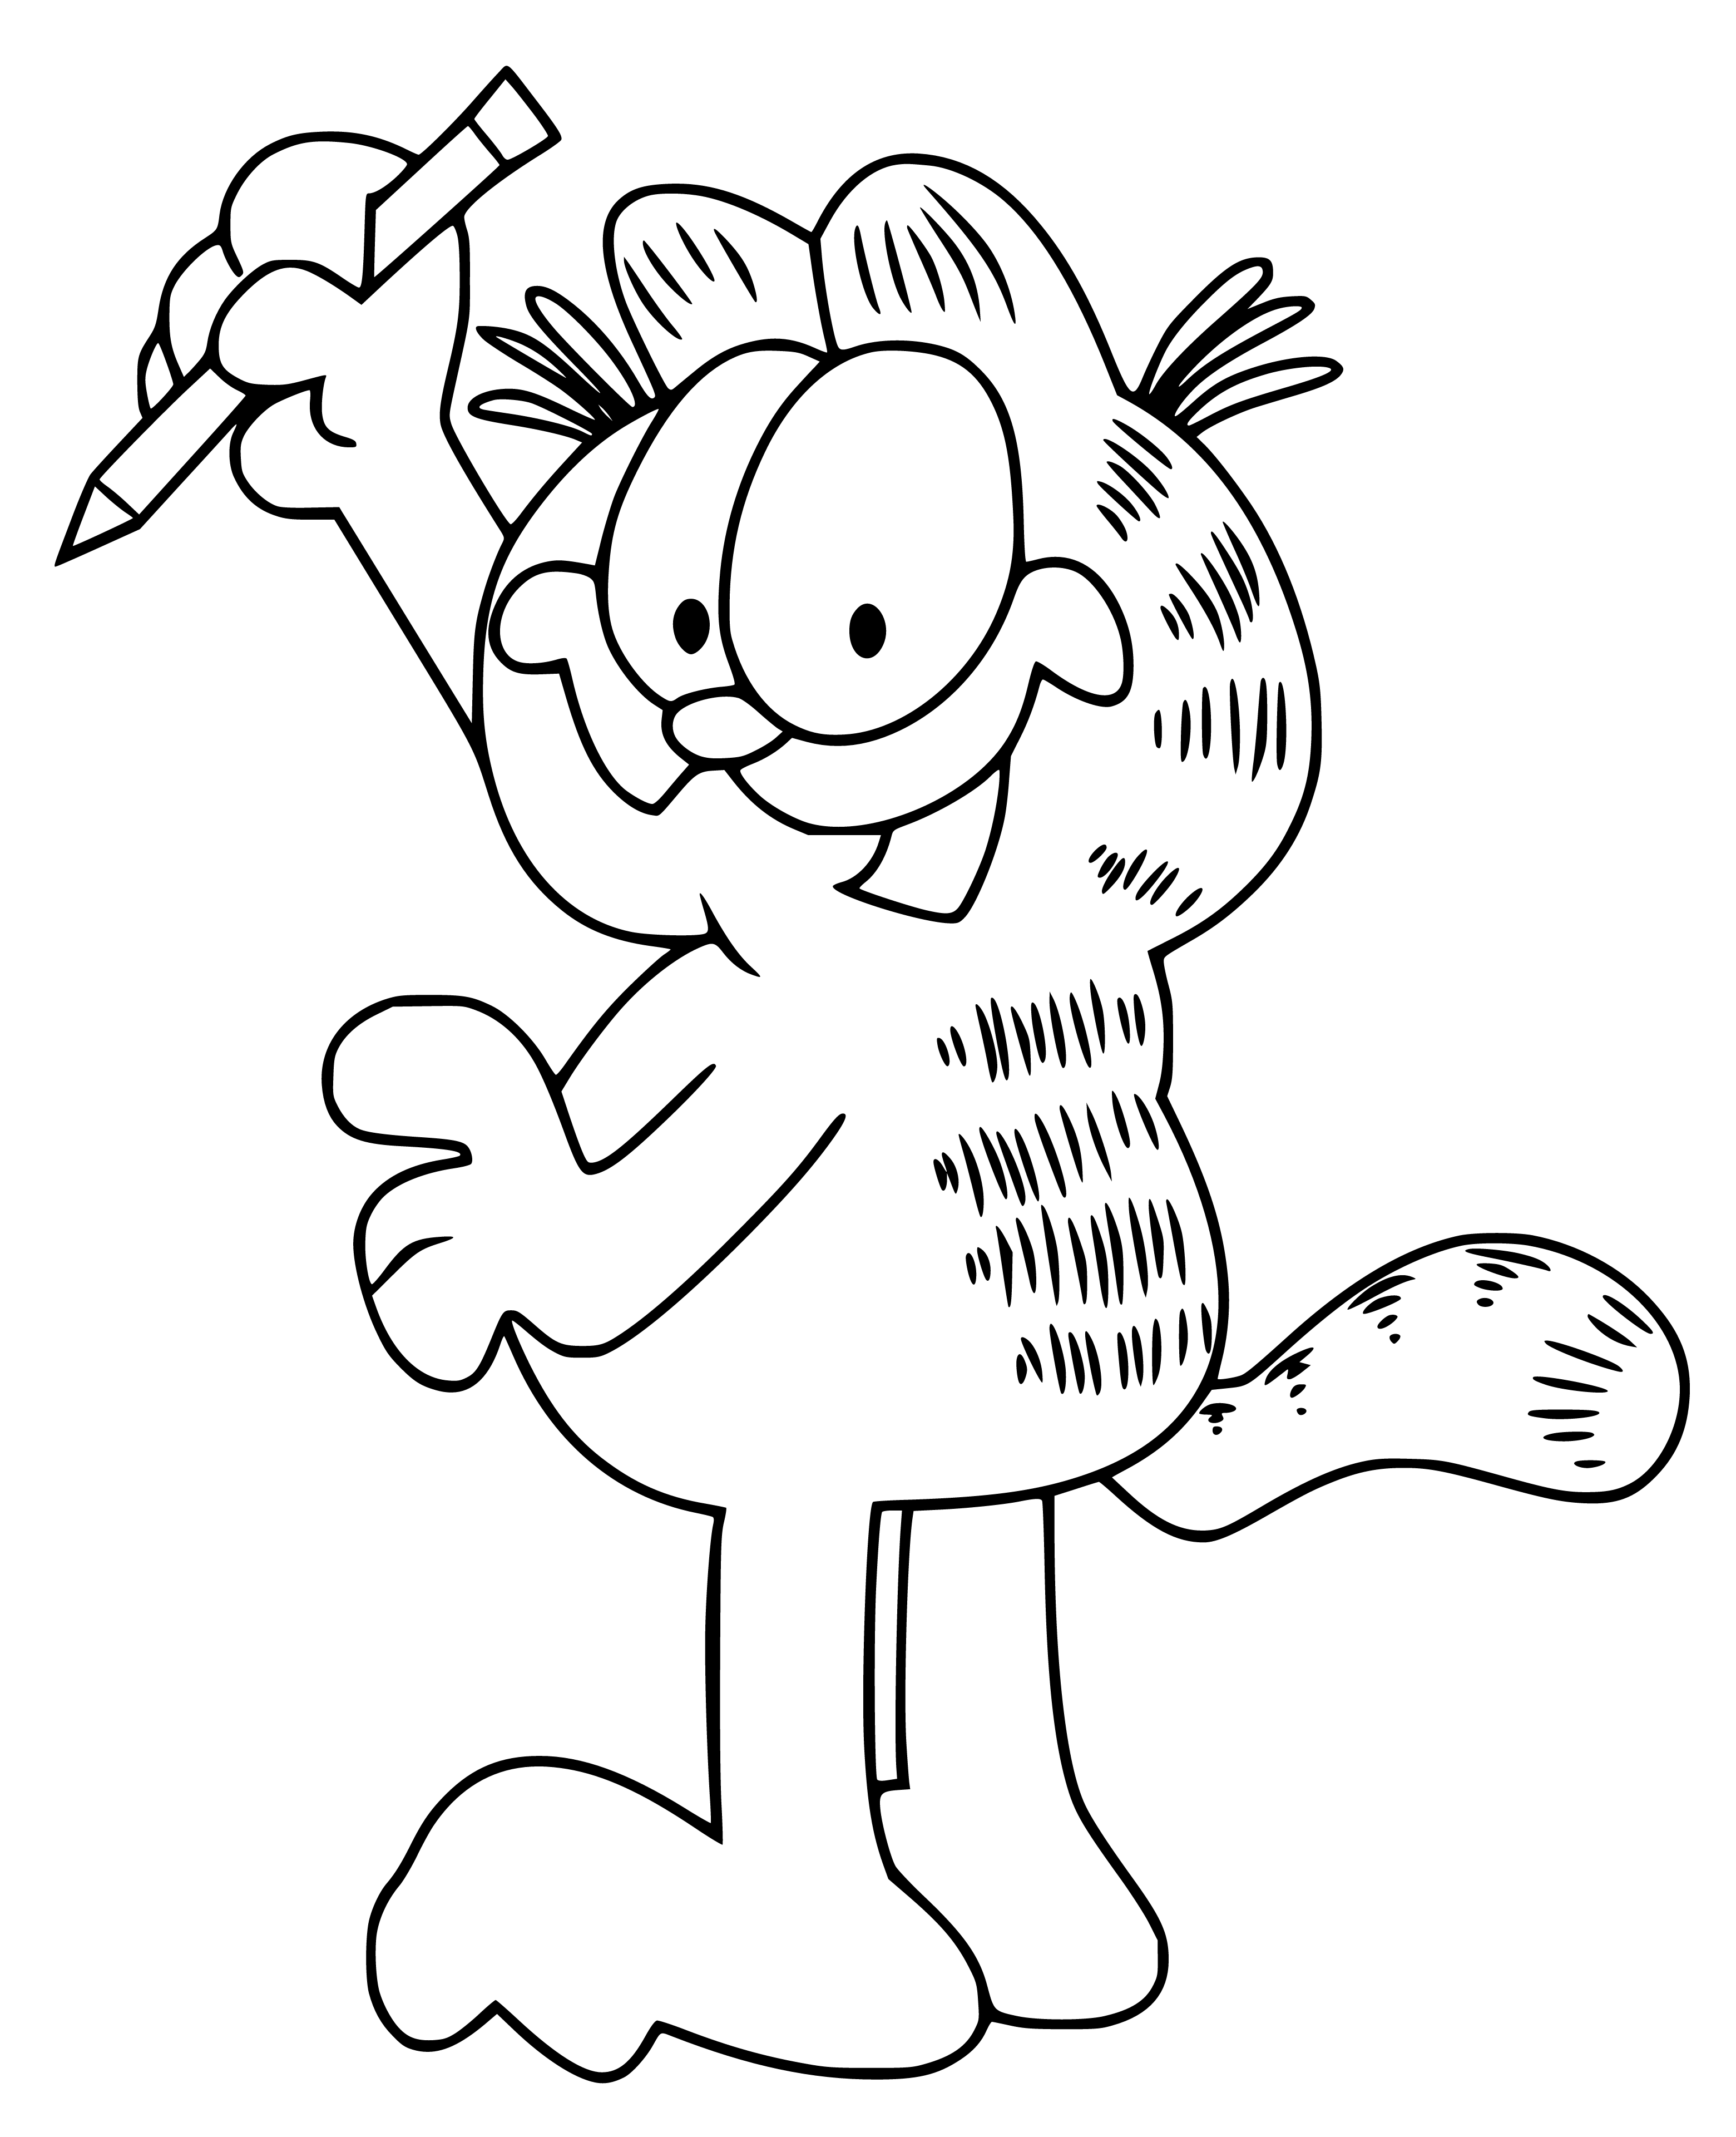 Printable Garfield as Student Coloring Page for kids.